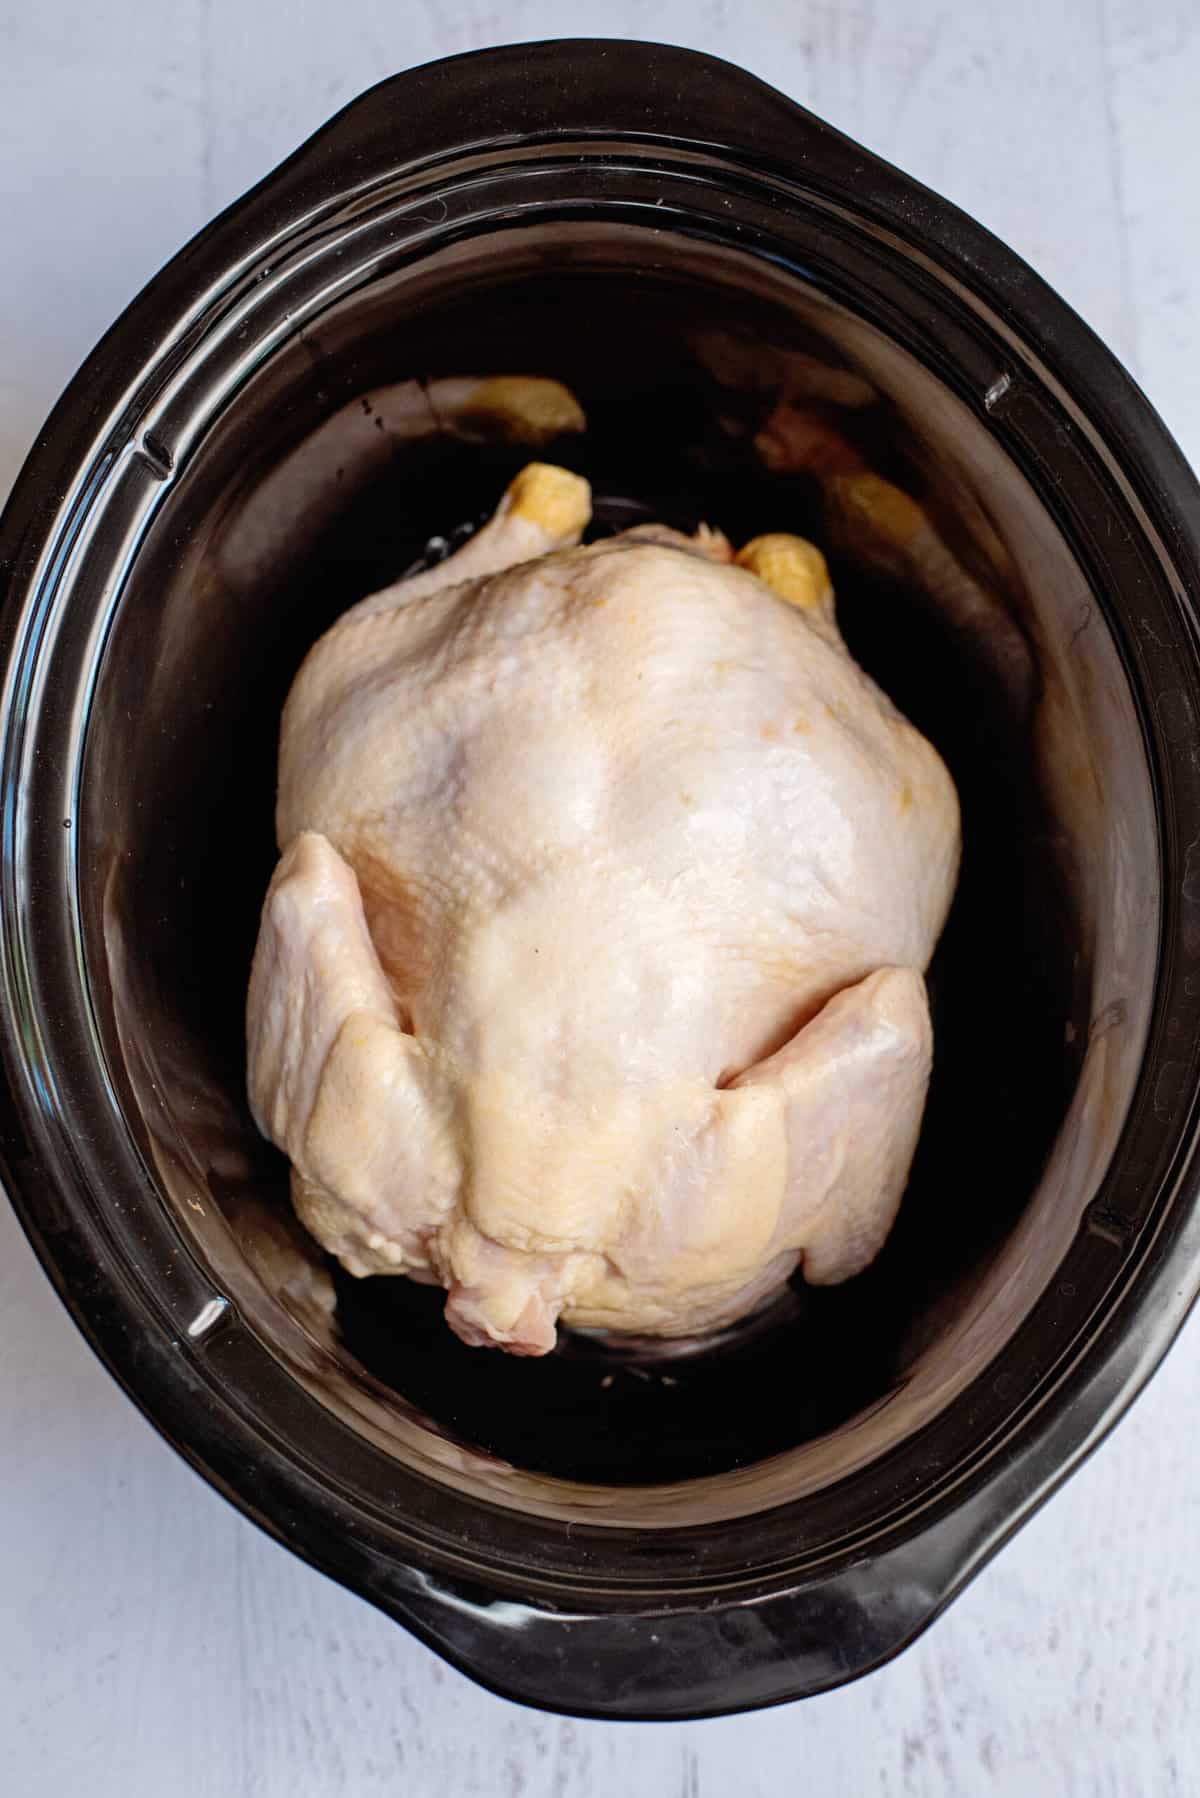 put the chicken in a crock pot